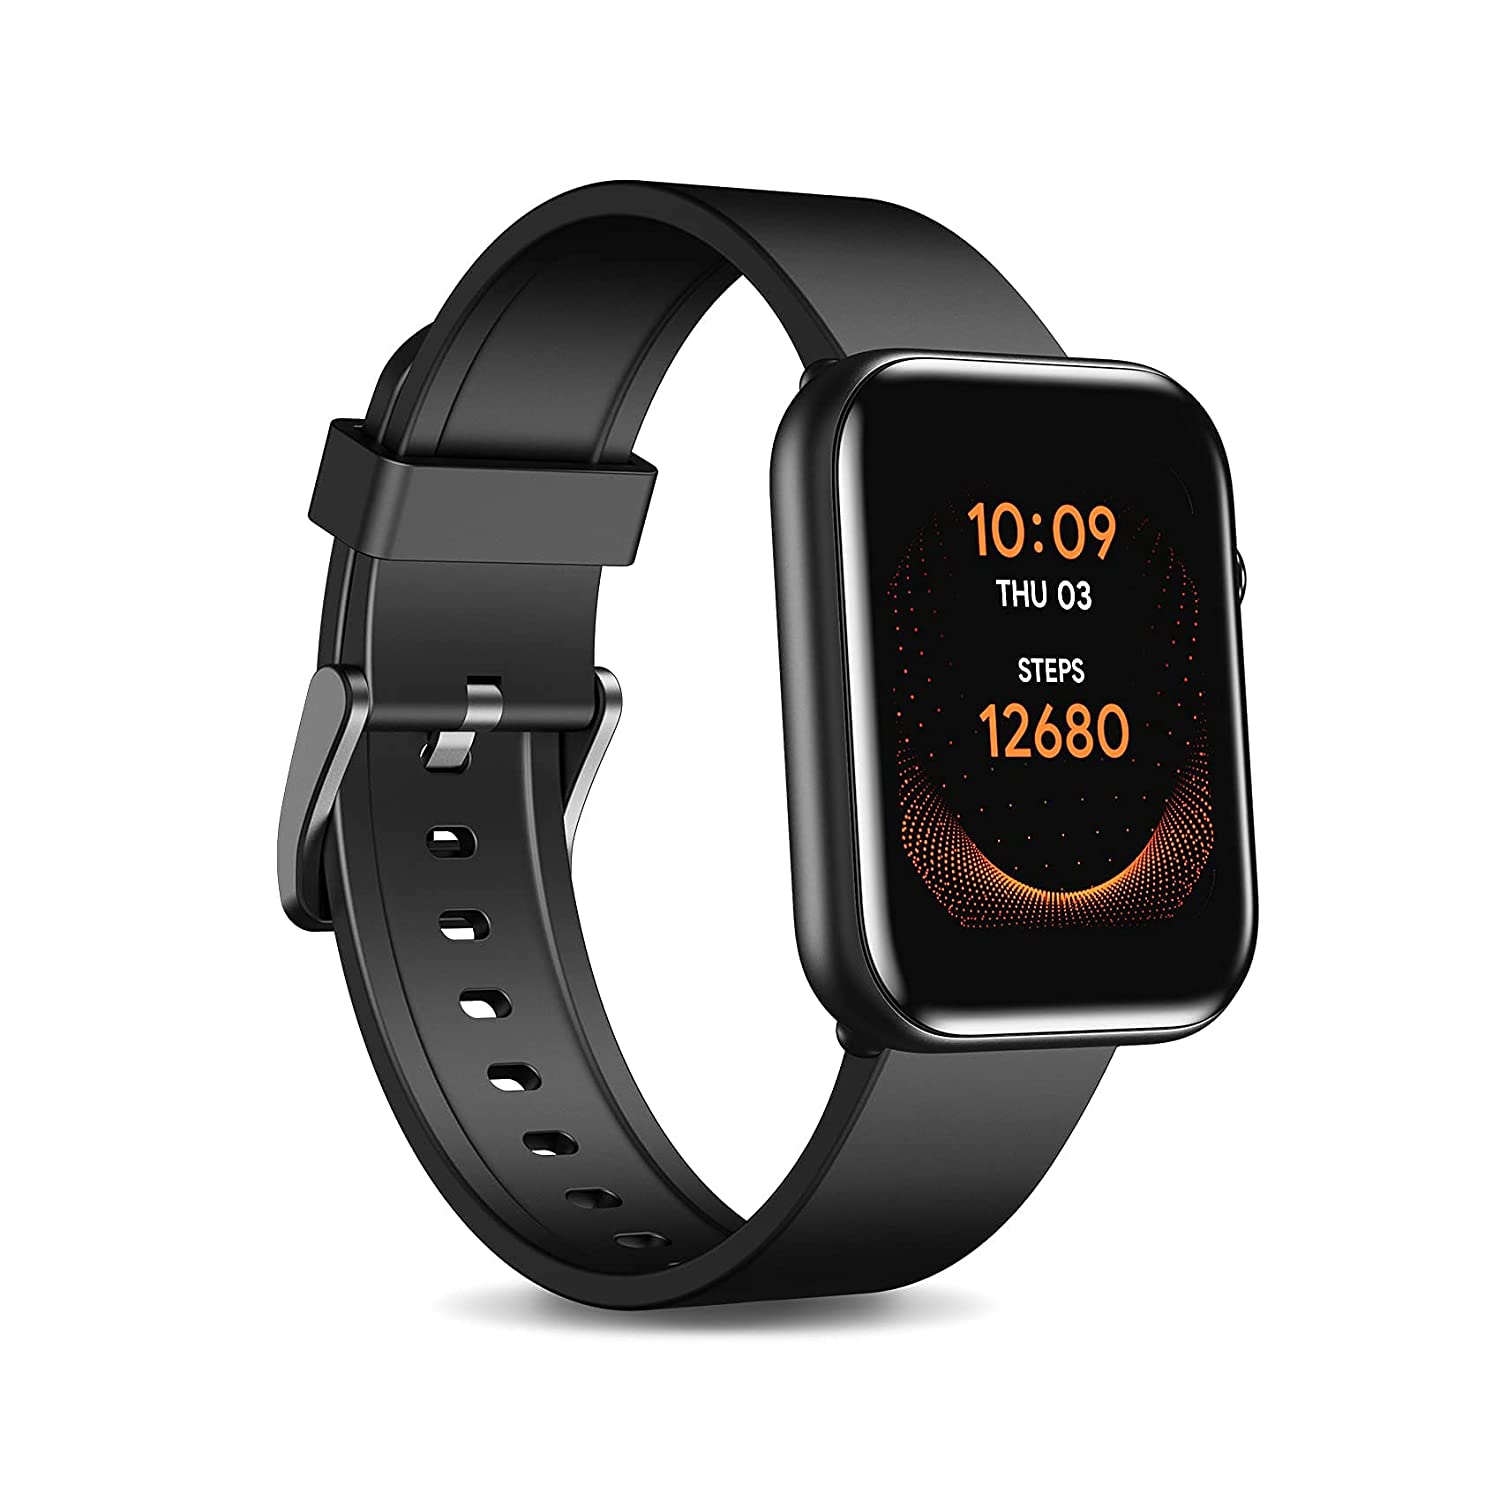 Mobvoi TicWatch GTH launched with 10 days battery life and 24 x 7 health monitoring in India: Specs, Price